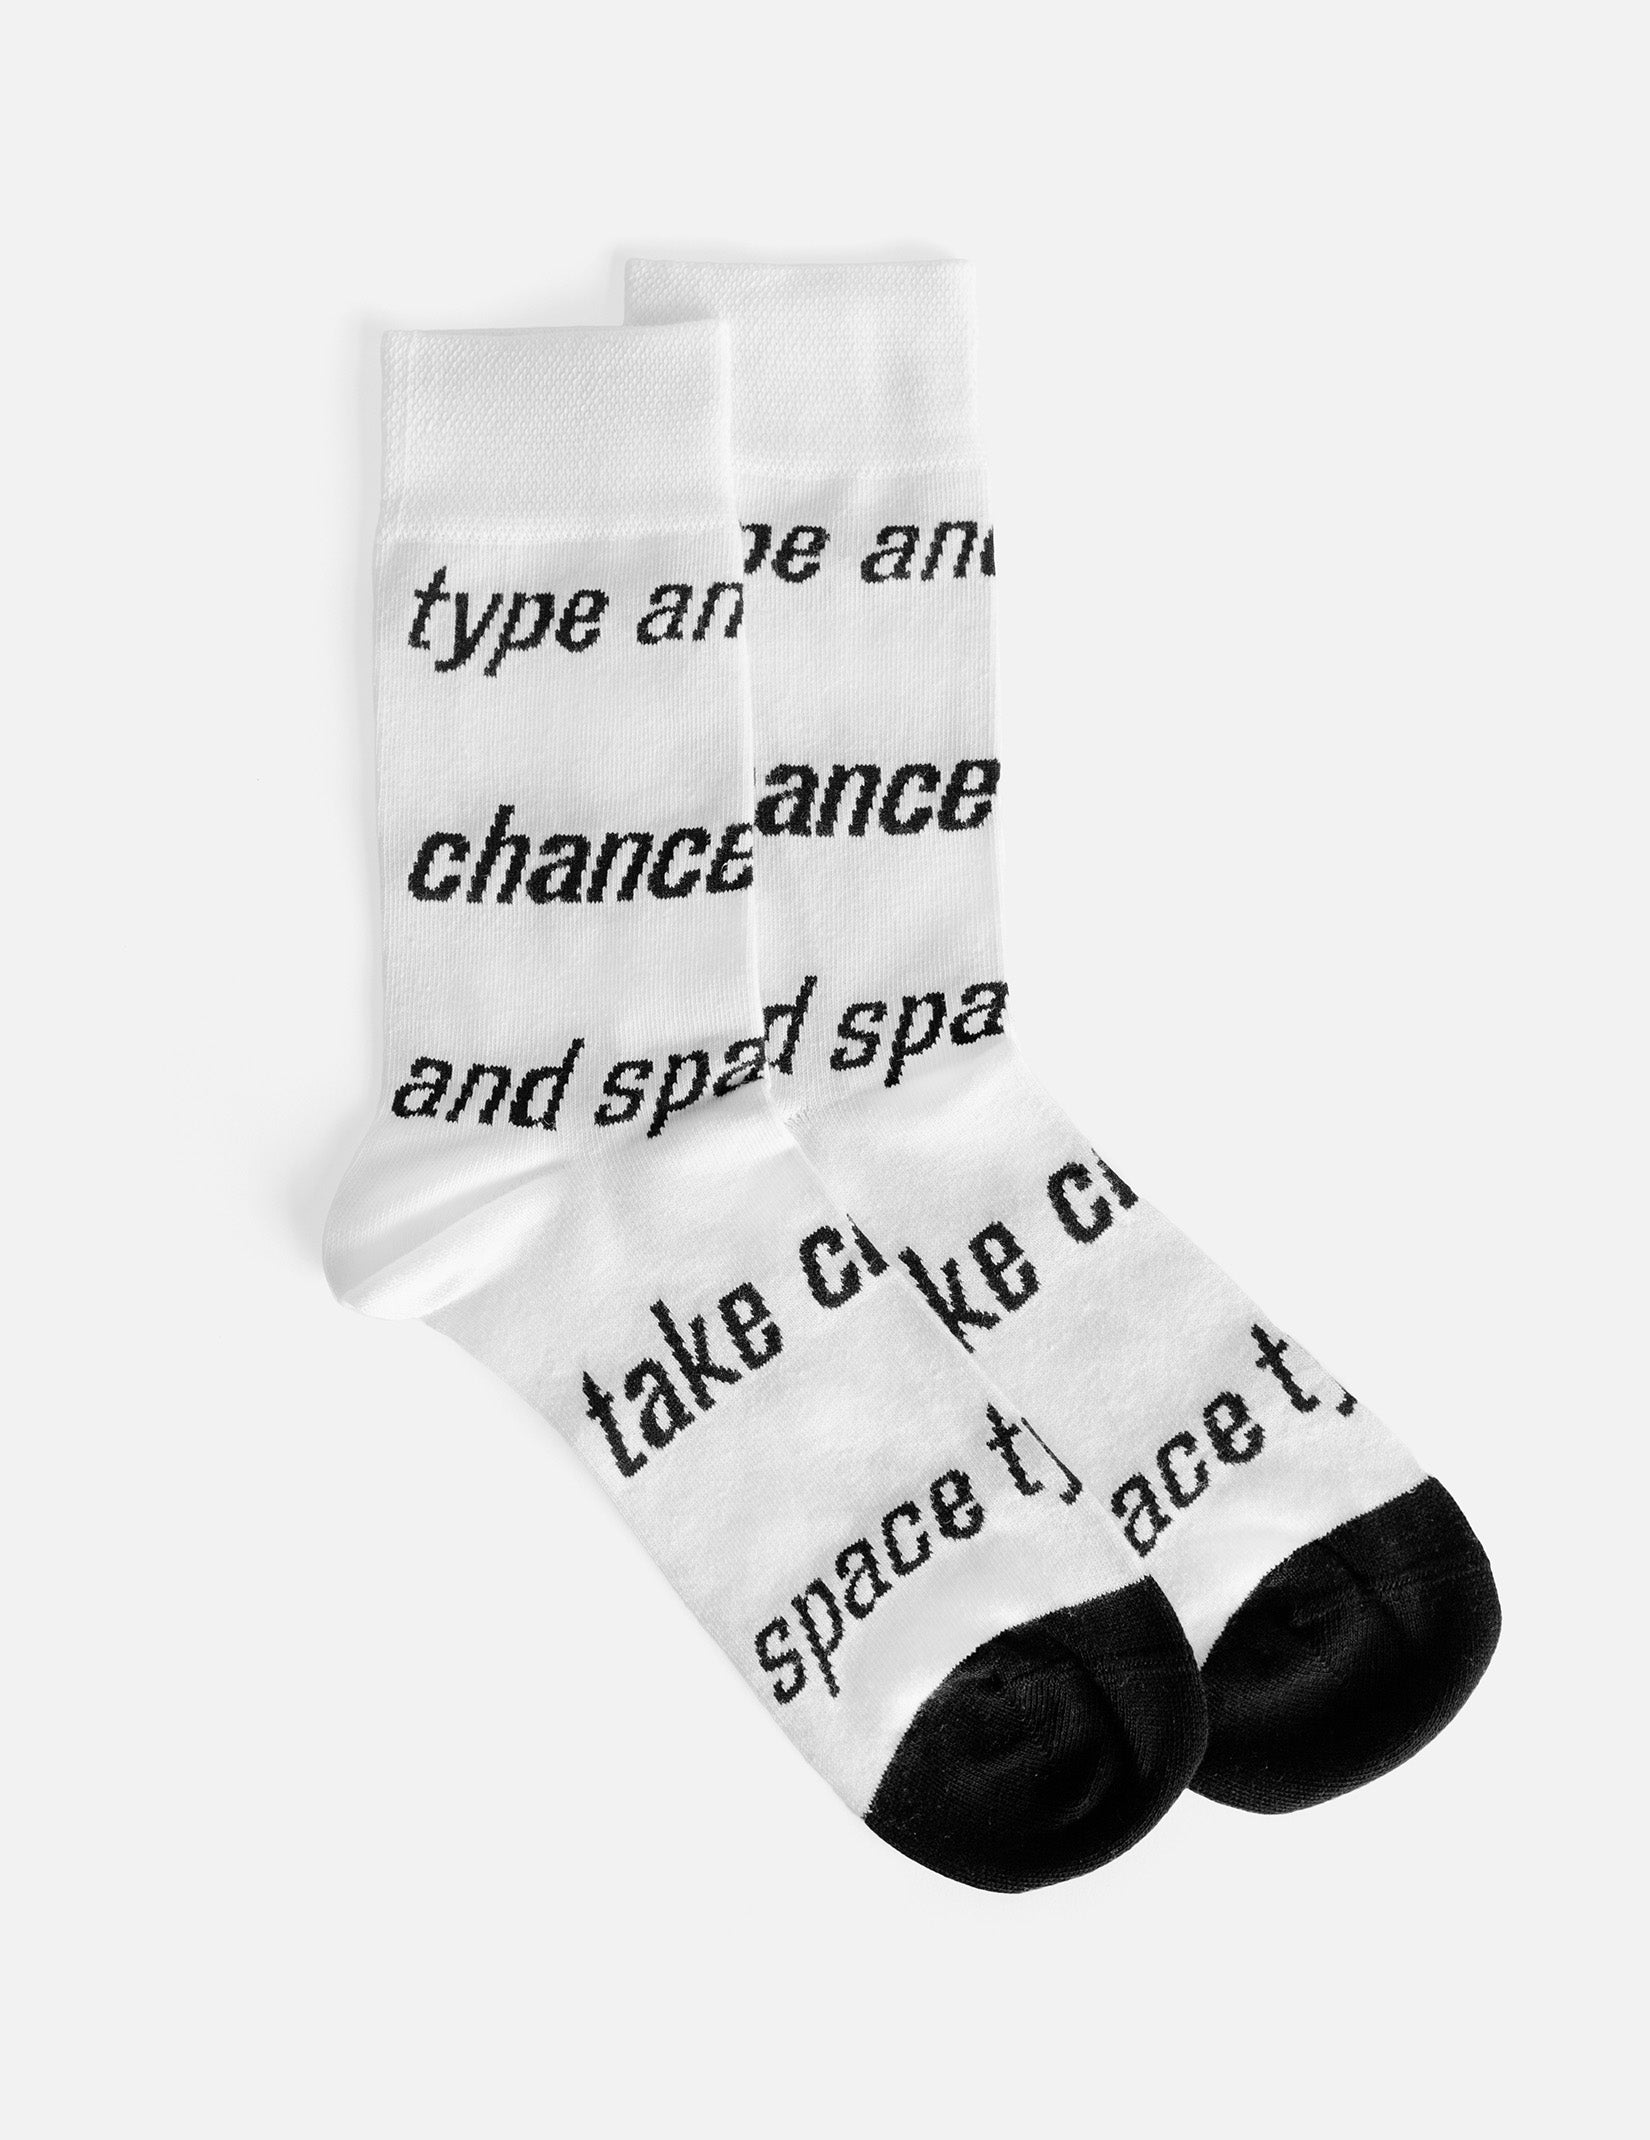 White socks with black typography in the shape of stripes that say ‘take chances’ and ‘type and space’. 